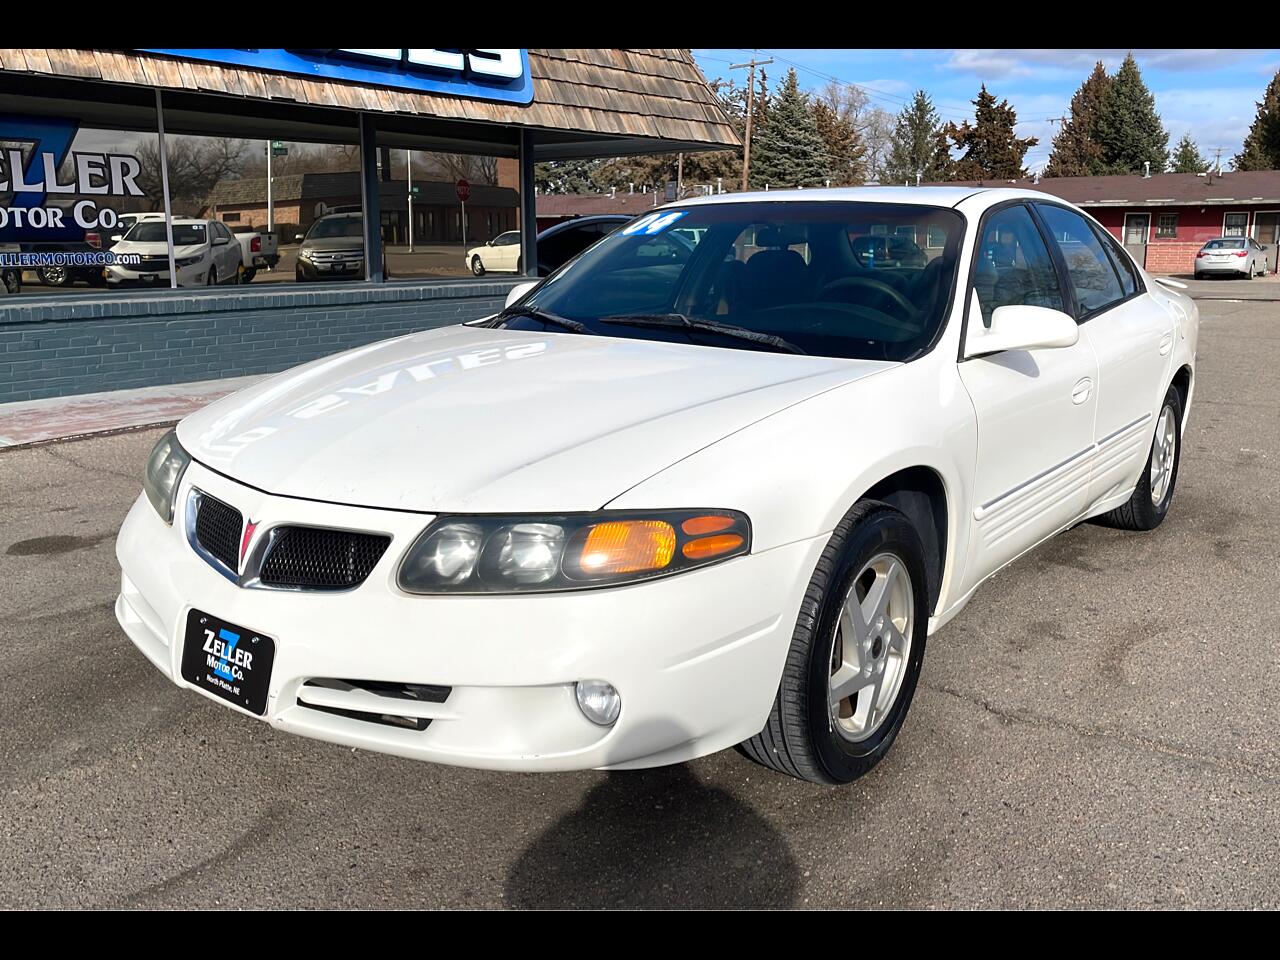 Used Pontiac Bonneville's nationwide for sale - MotorCloud